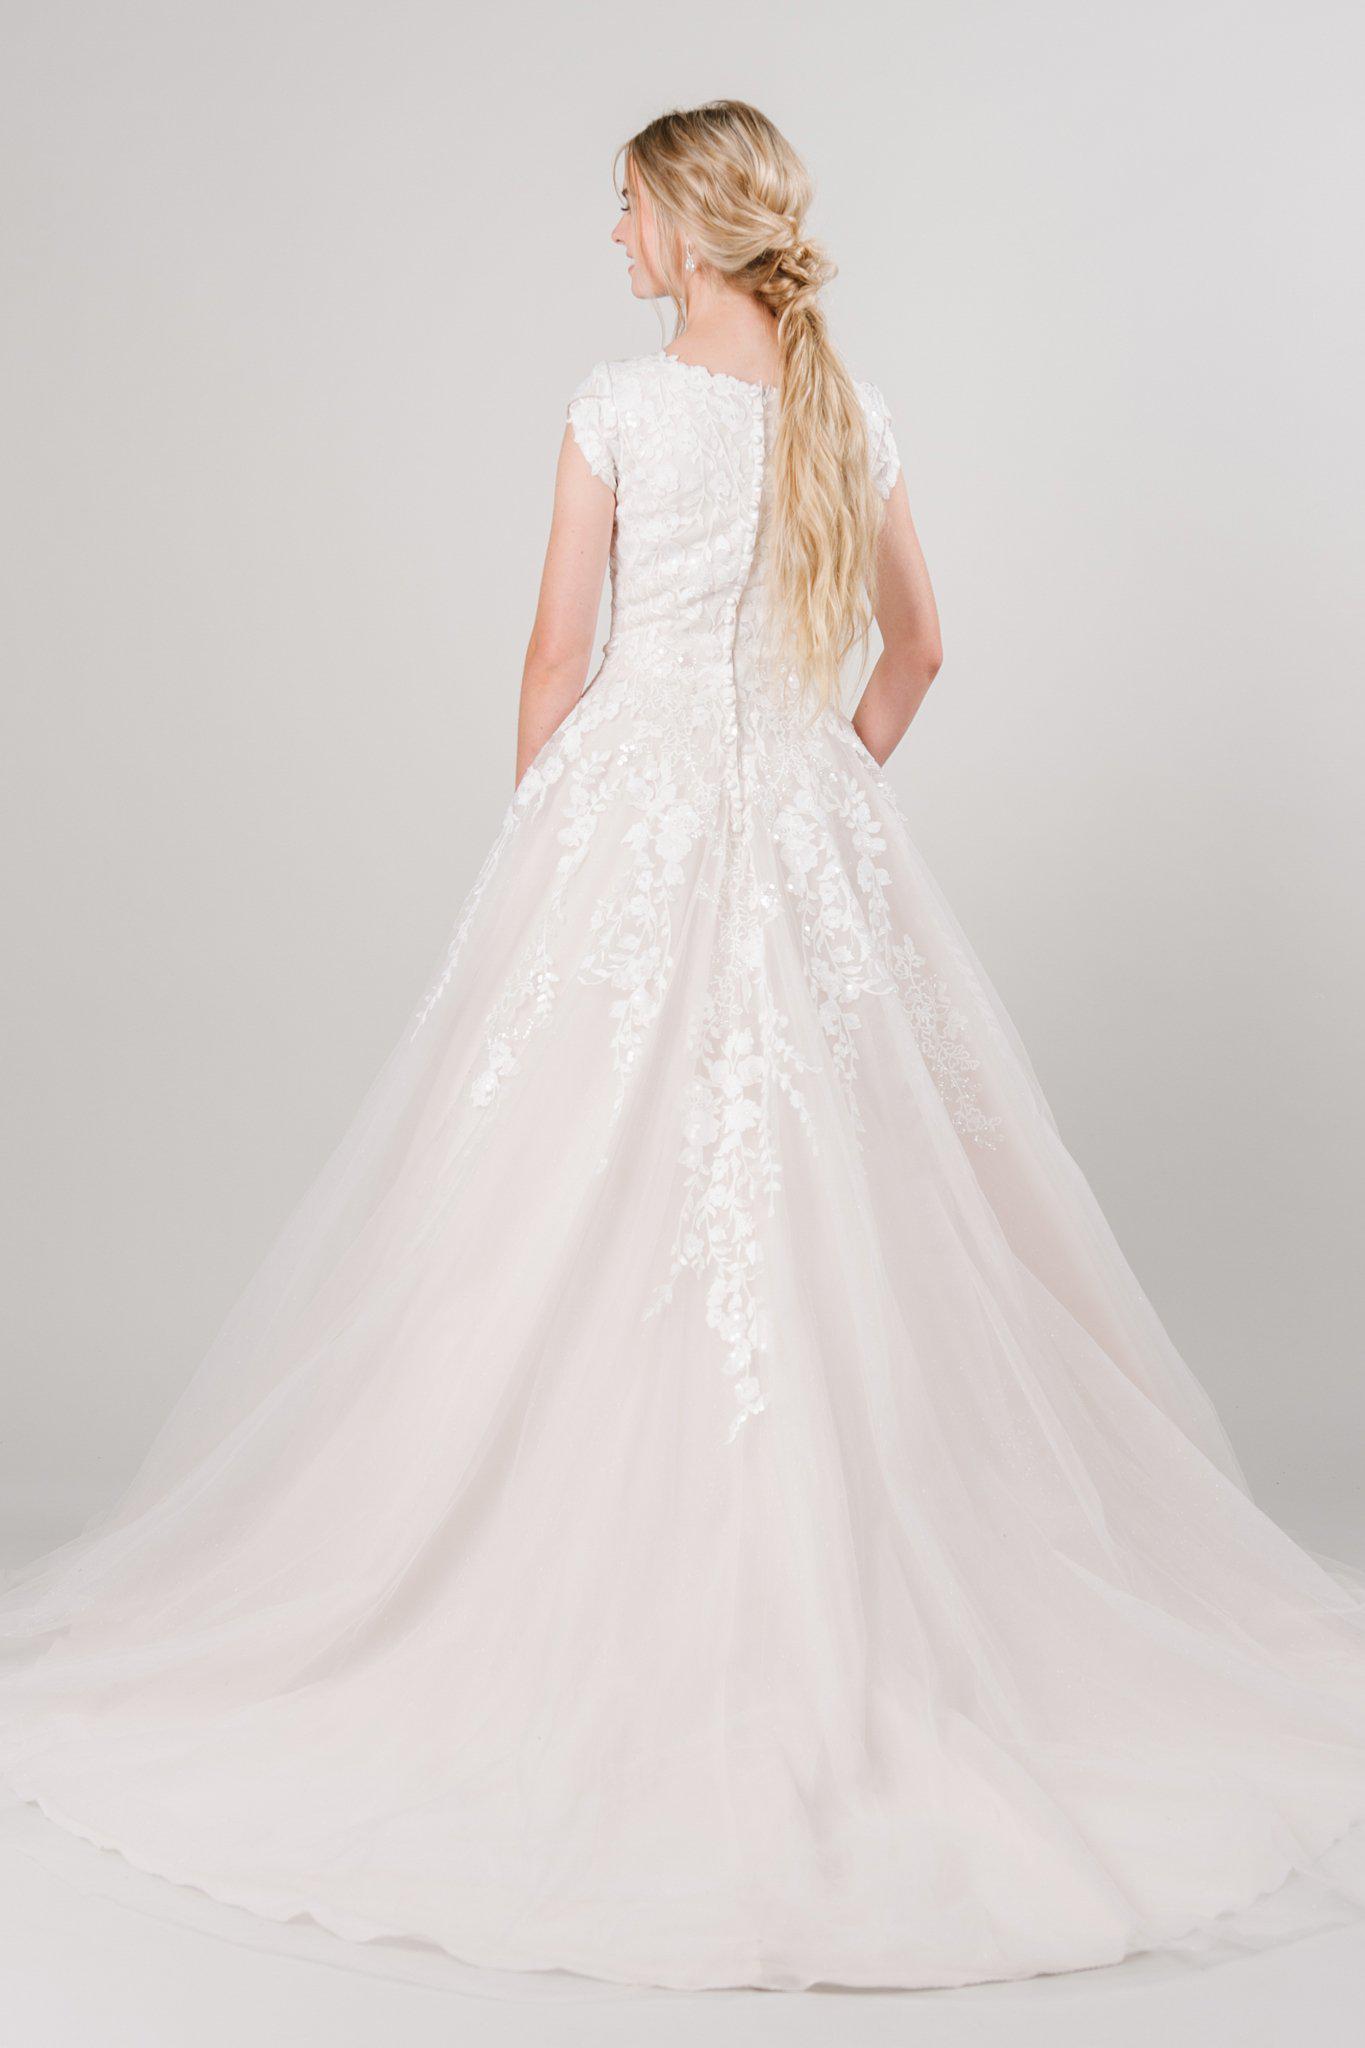 Modest ballgown with lace and sparkles from LatterDayBride, a modest wedding dress shop in Salt Lake City, Utah.